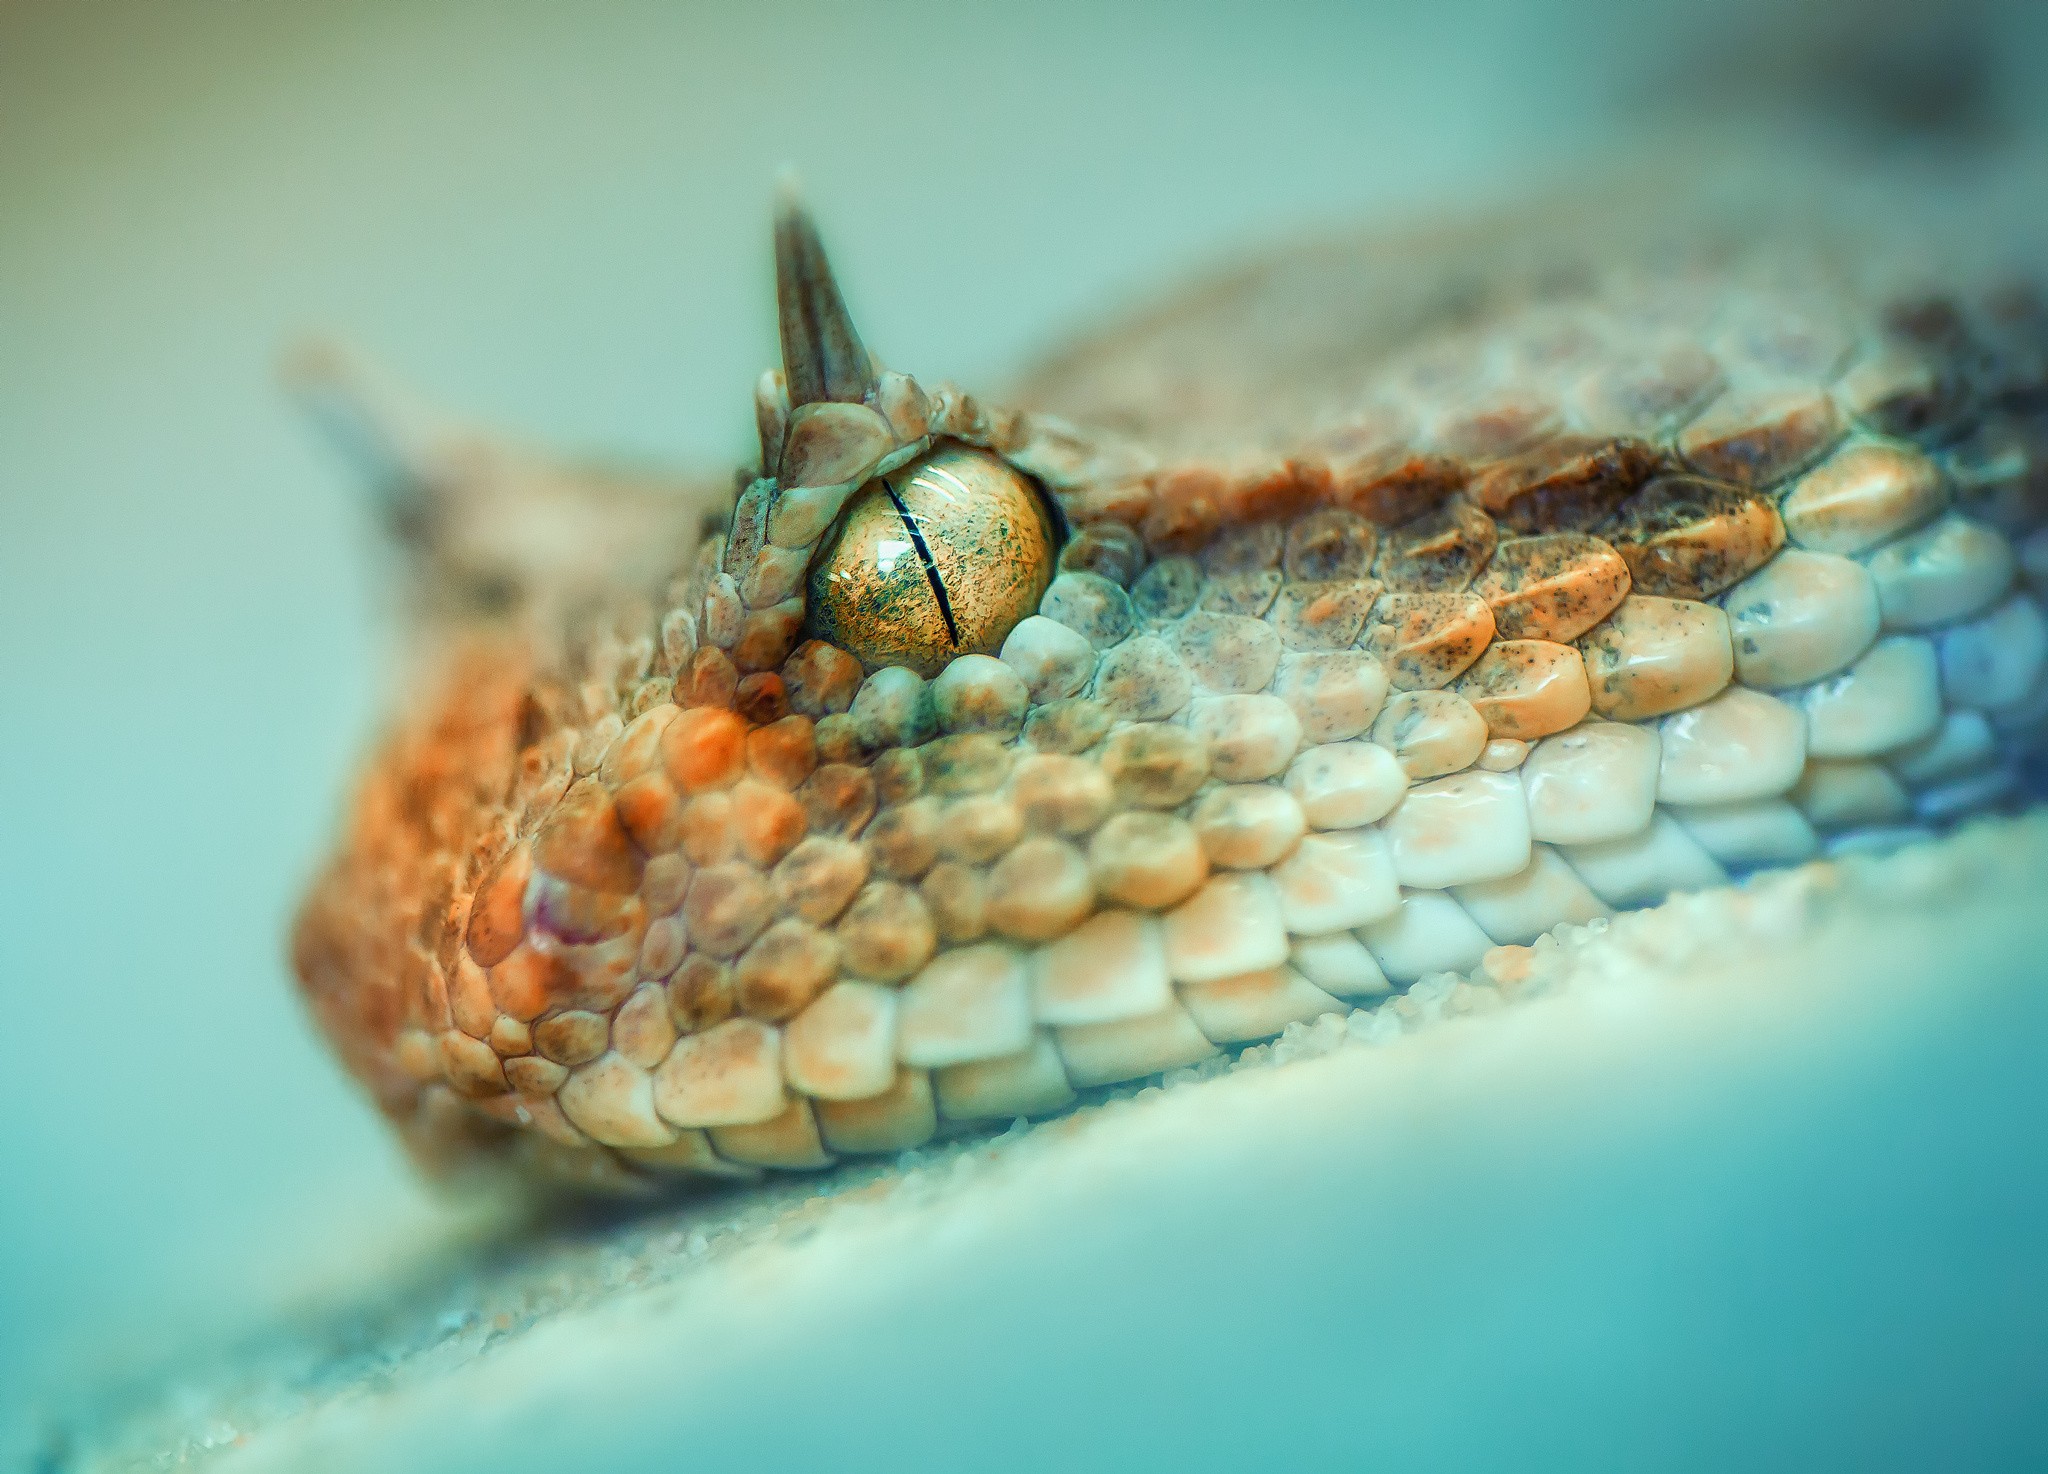 General 2048x1474 photography macro depth of field snake animals reptiles